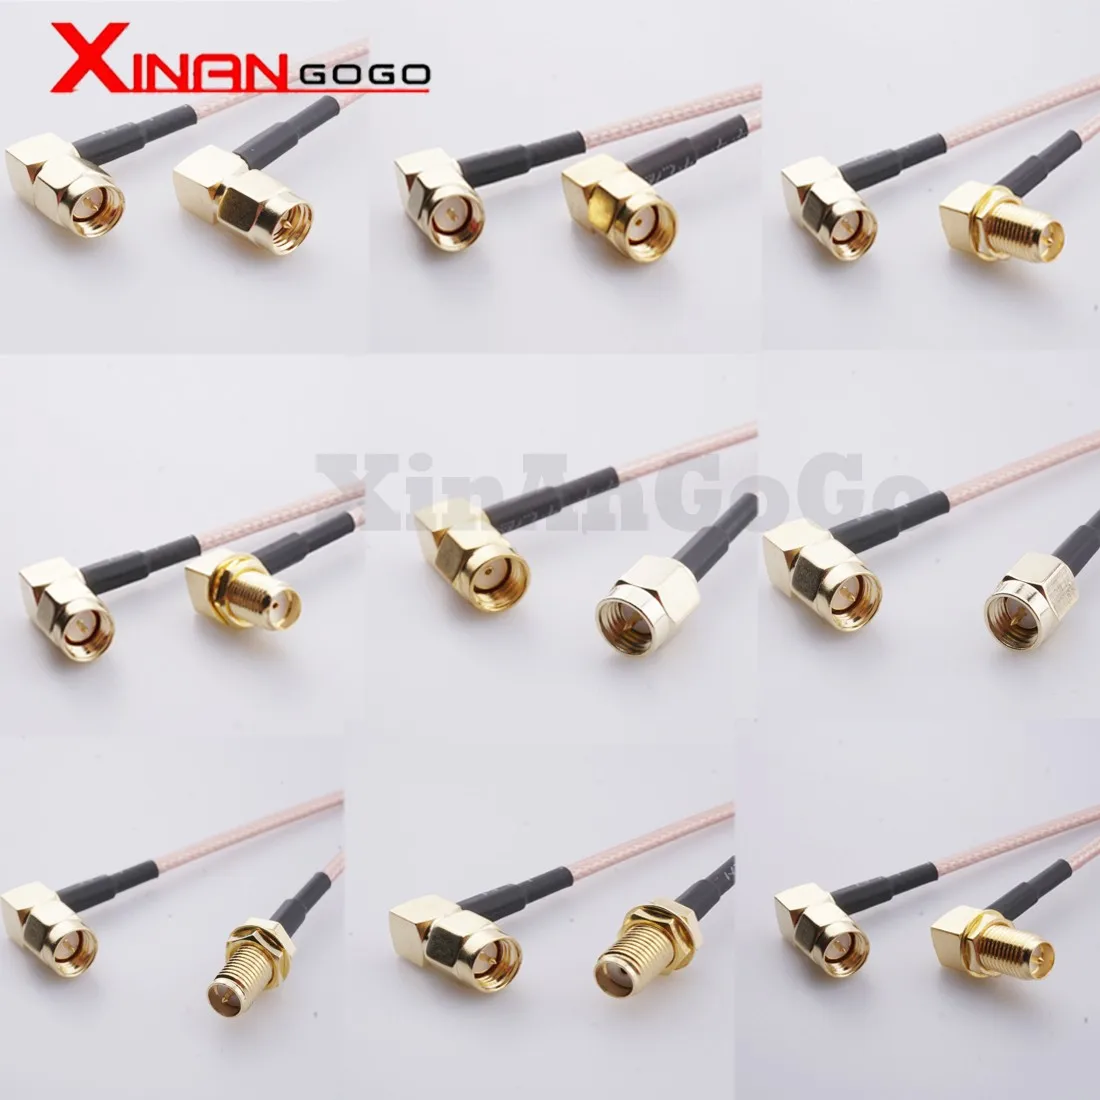 Xinangogo RG316 RG174 Cable Right Angle SMA Male To SMA Male Female Nut Bulkhead Extension Coax Jumper Pigtail